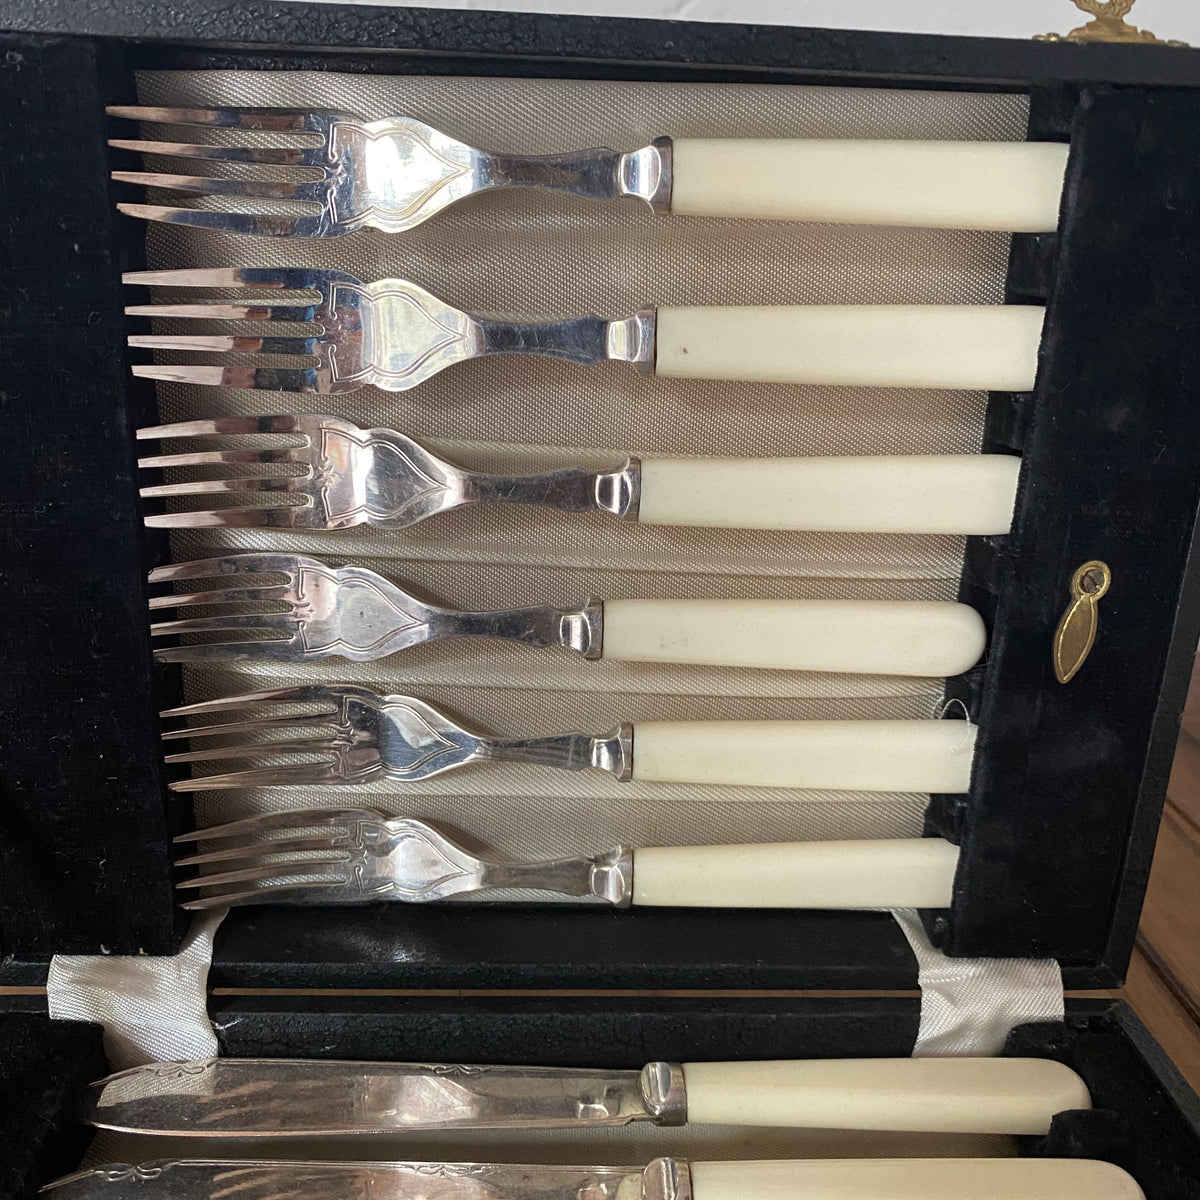 Fish Forks & Knives Silverplate & Celluloid -English 1930's?